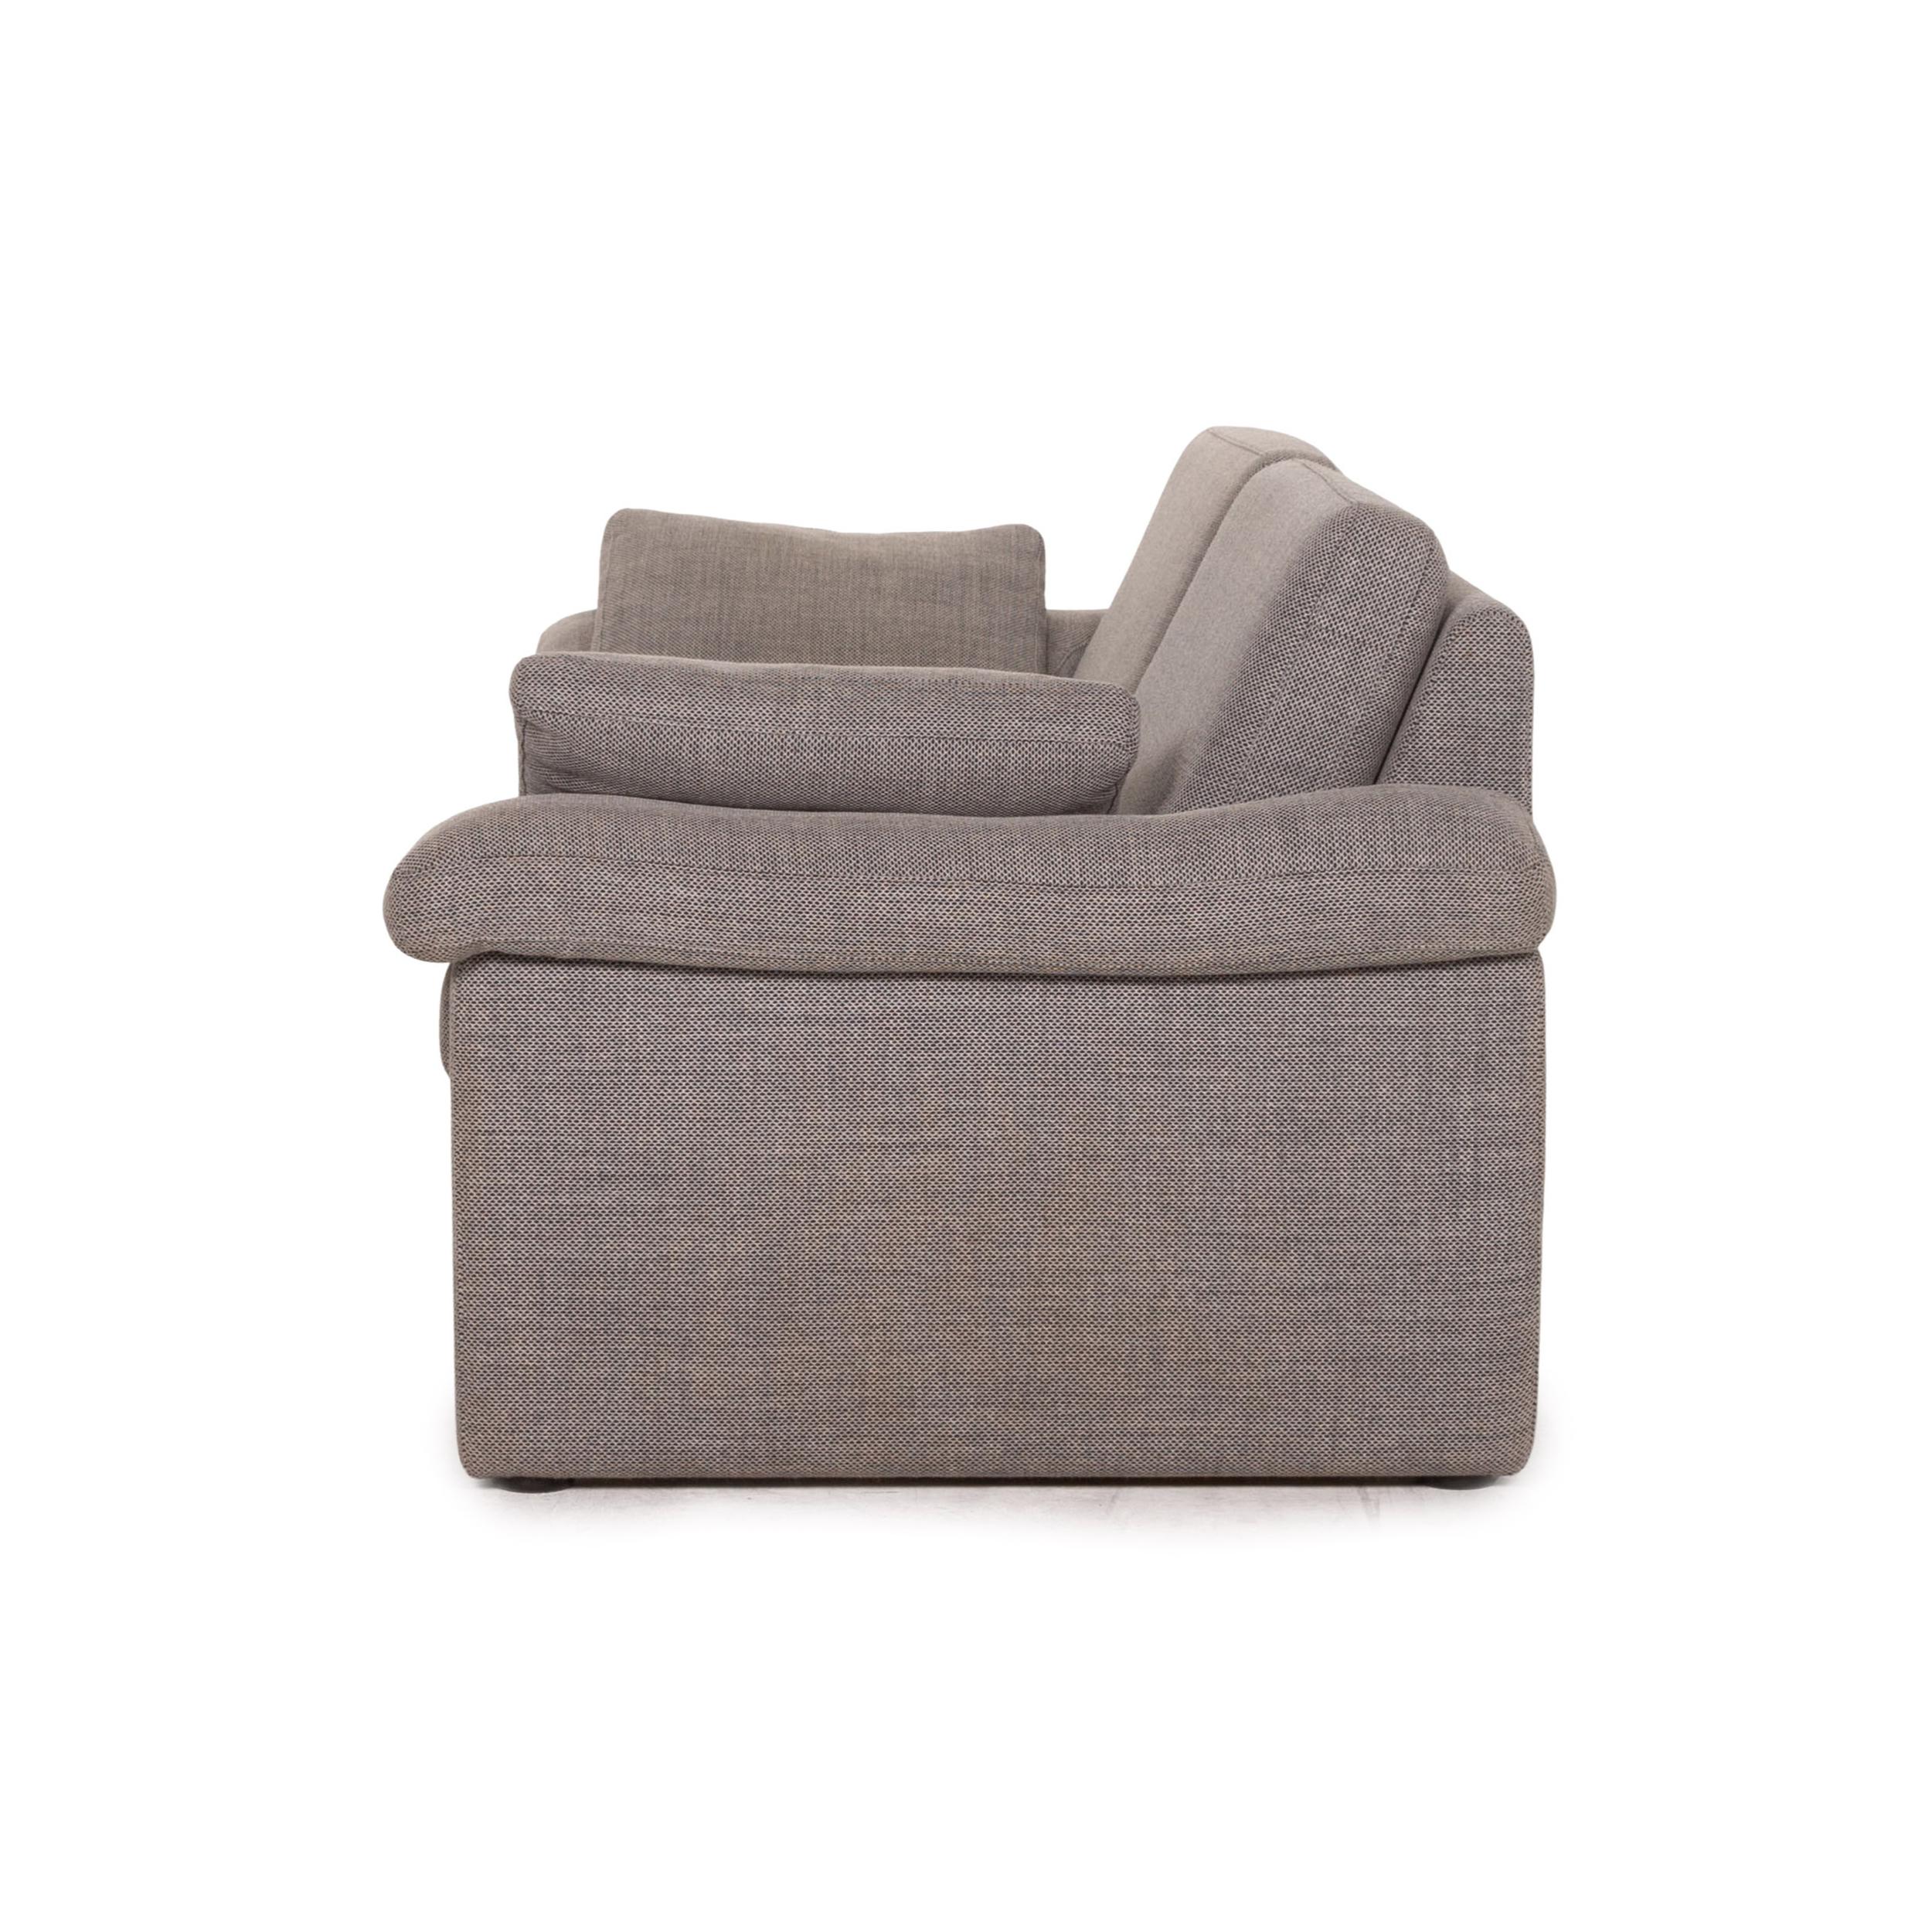 COR Conseta Fabric Sofa Gray Two-Seater Couch 4